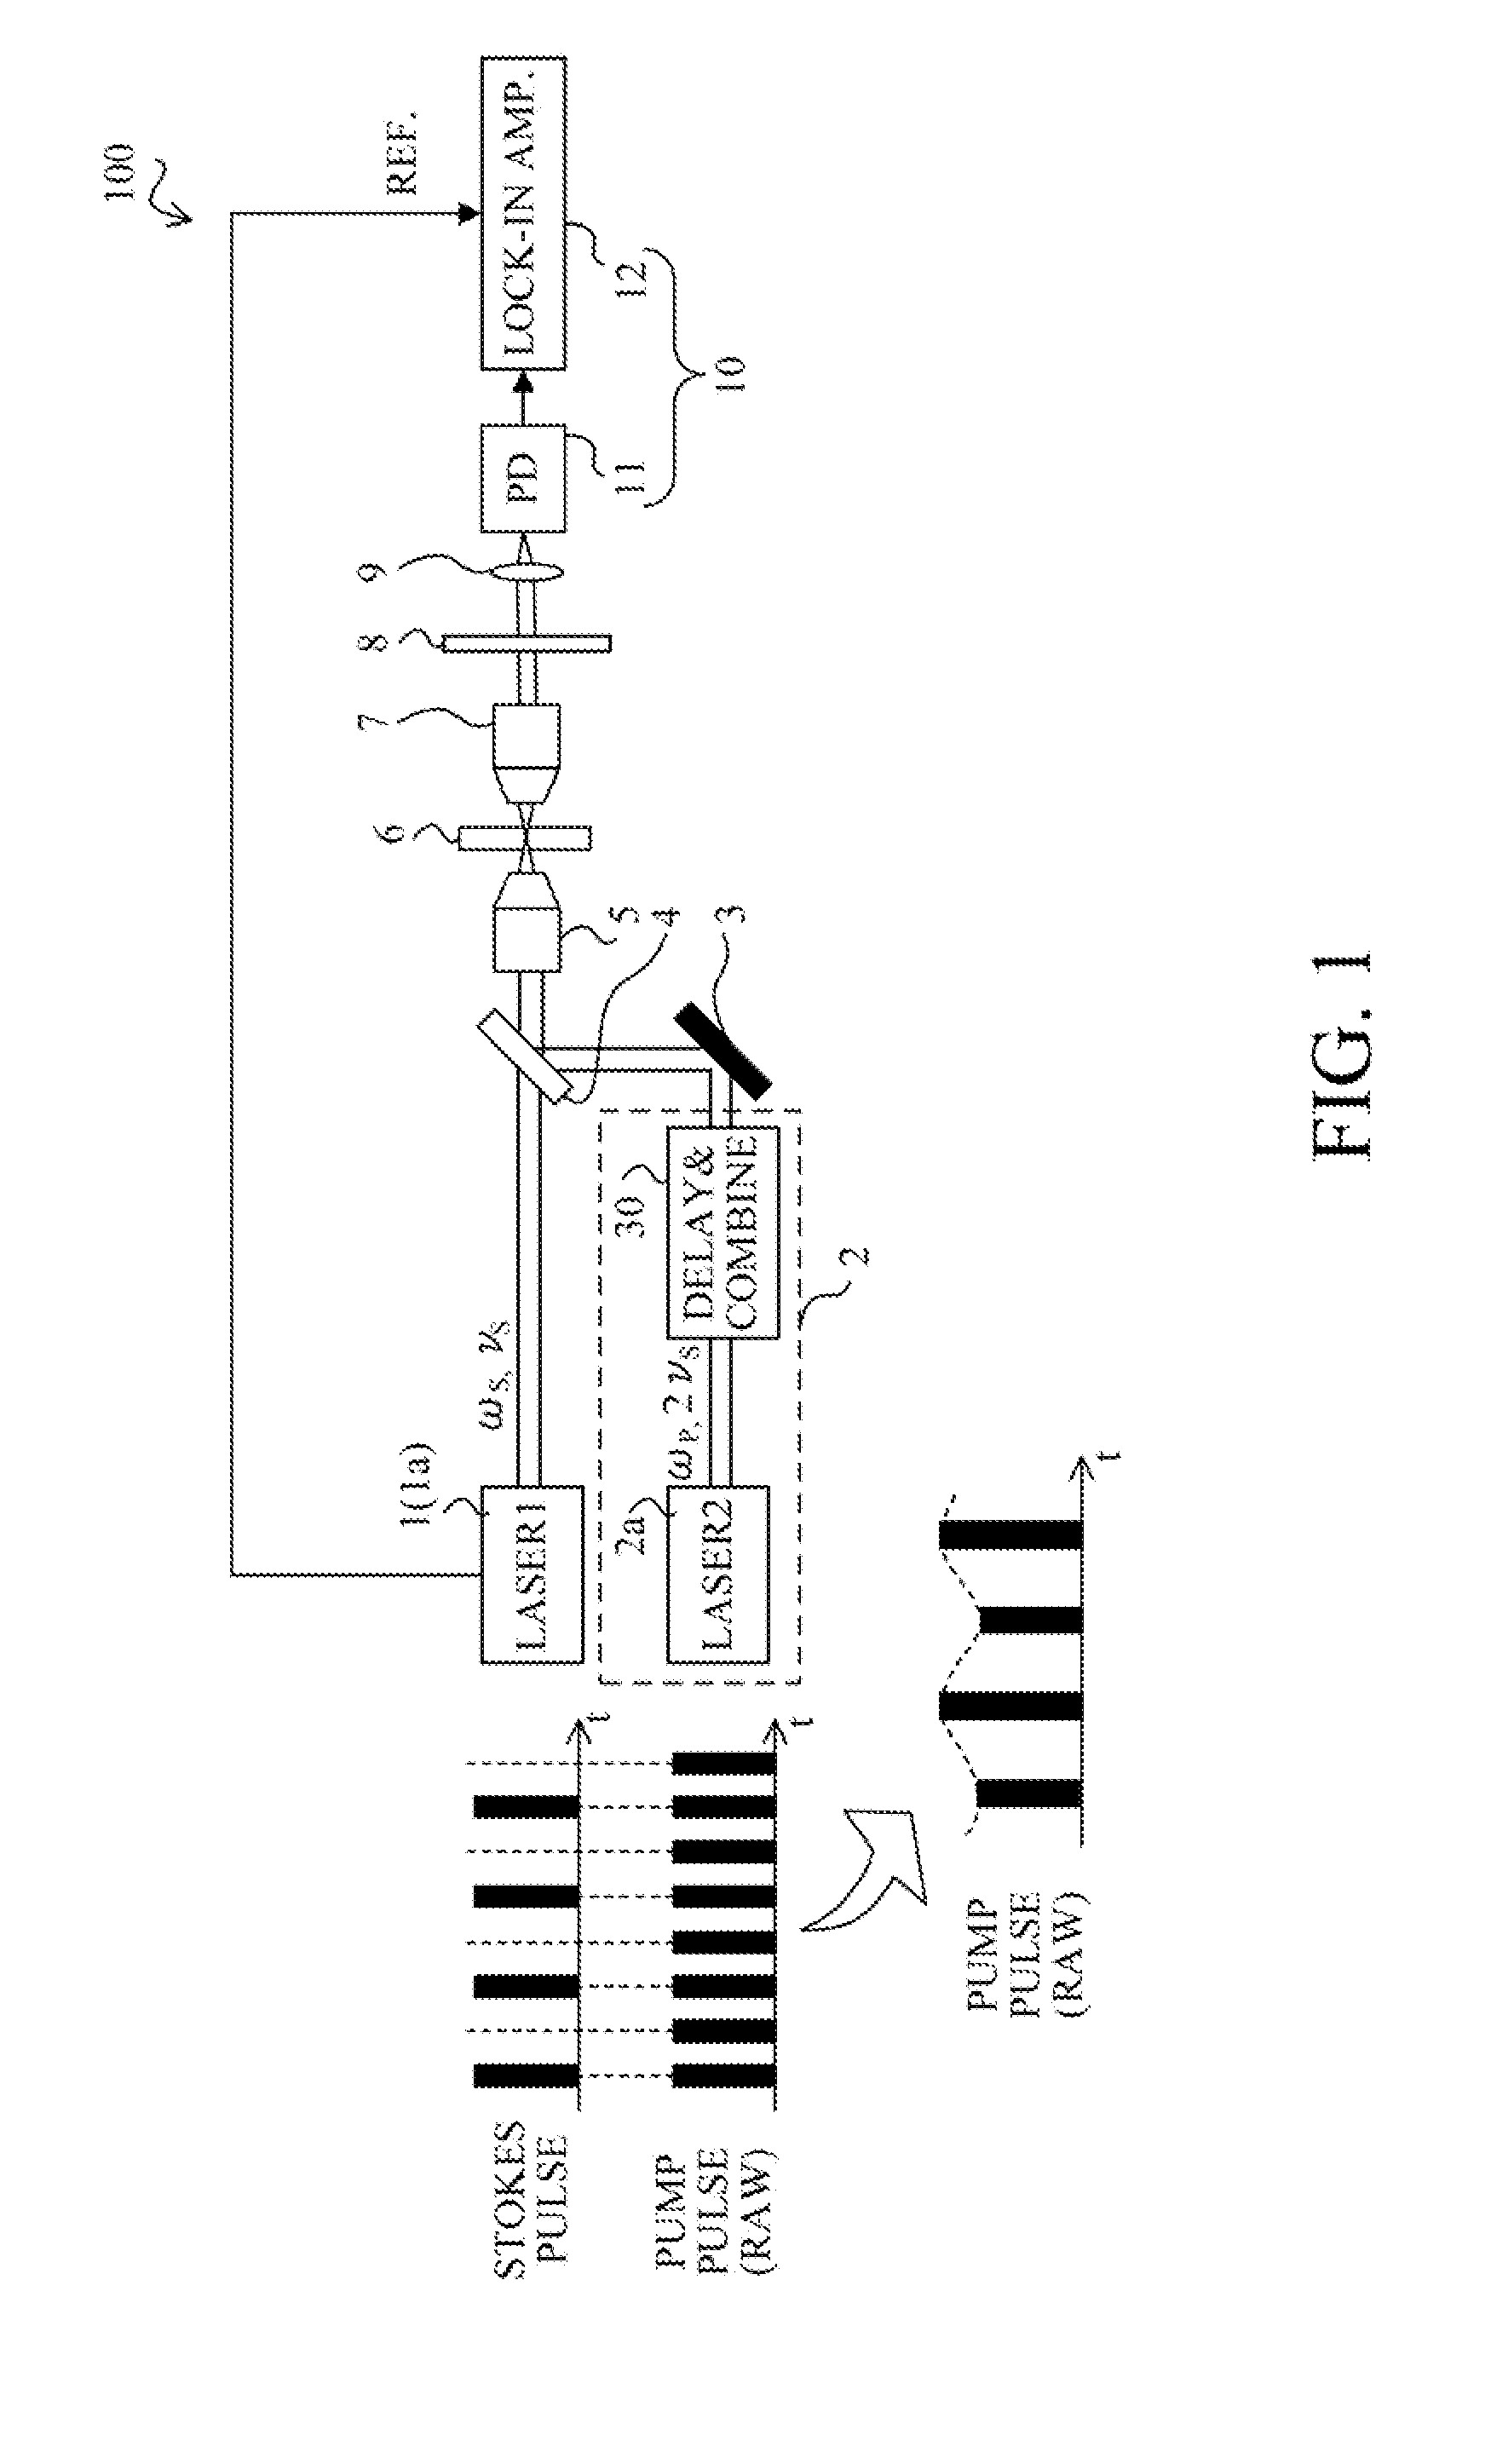 Stimulated raman scattering detection apparatus